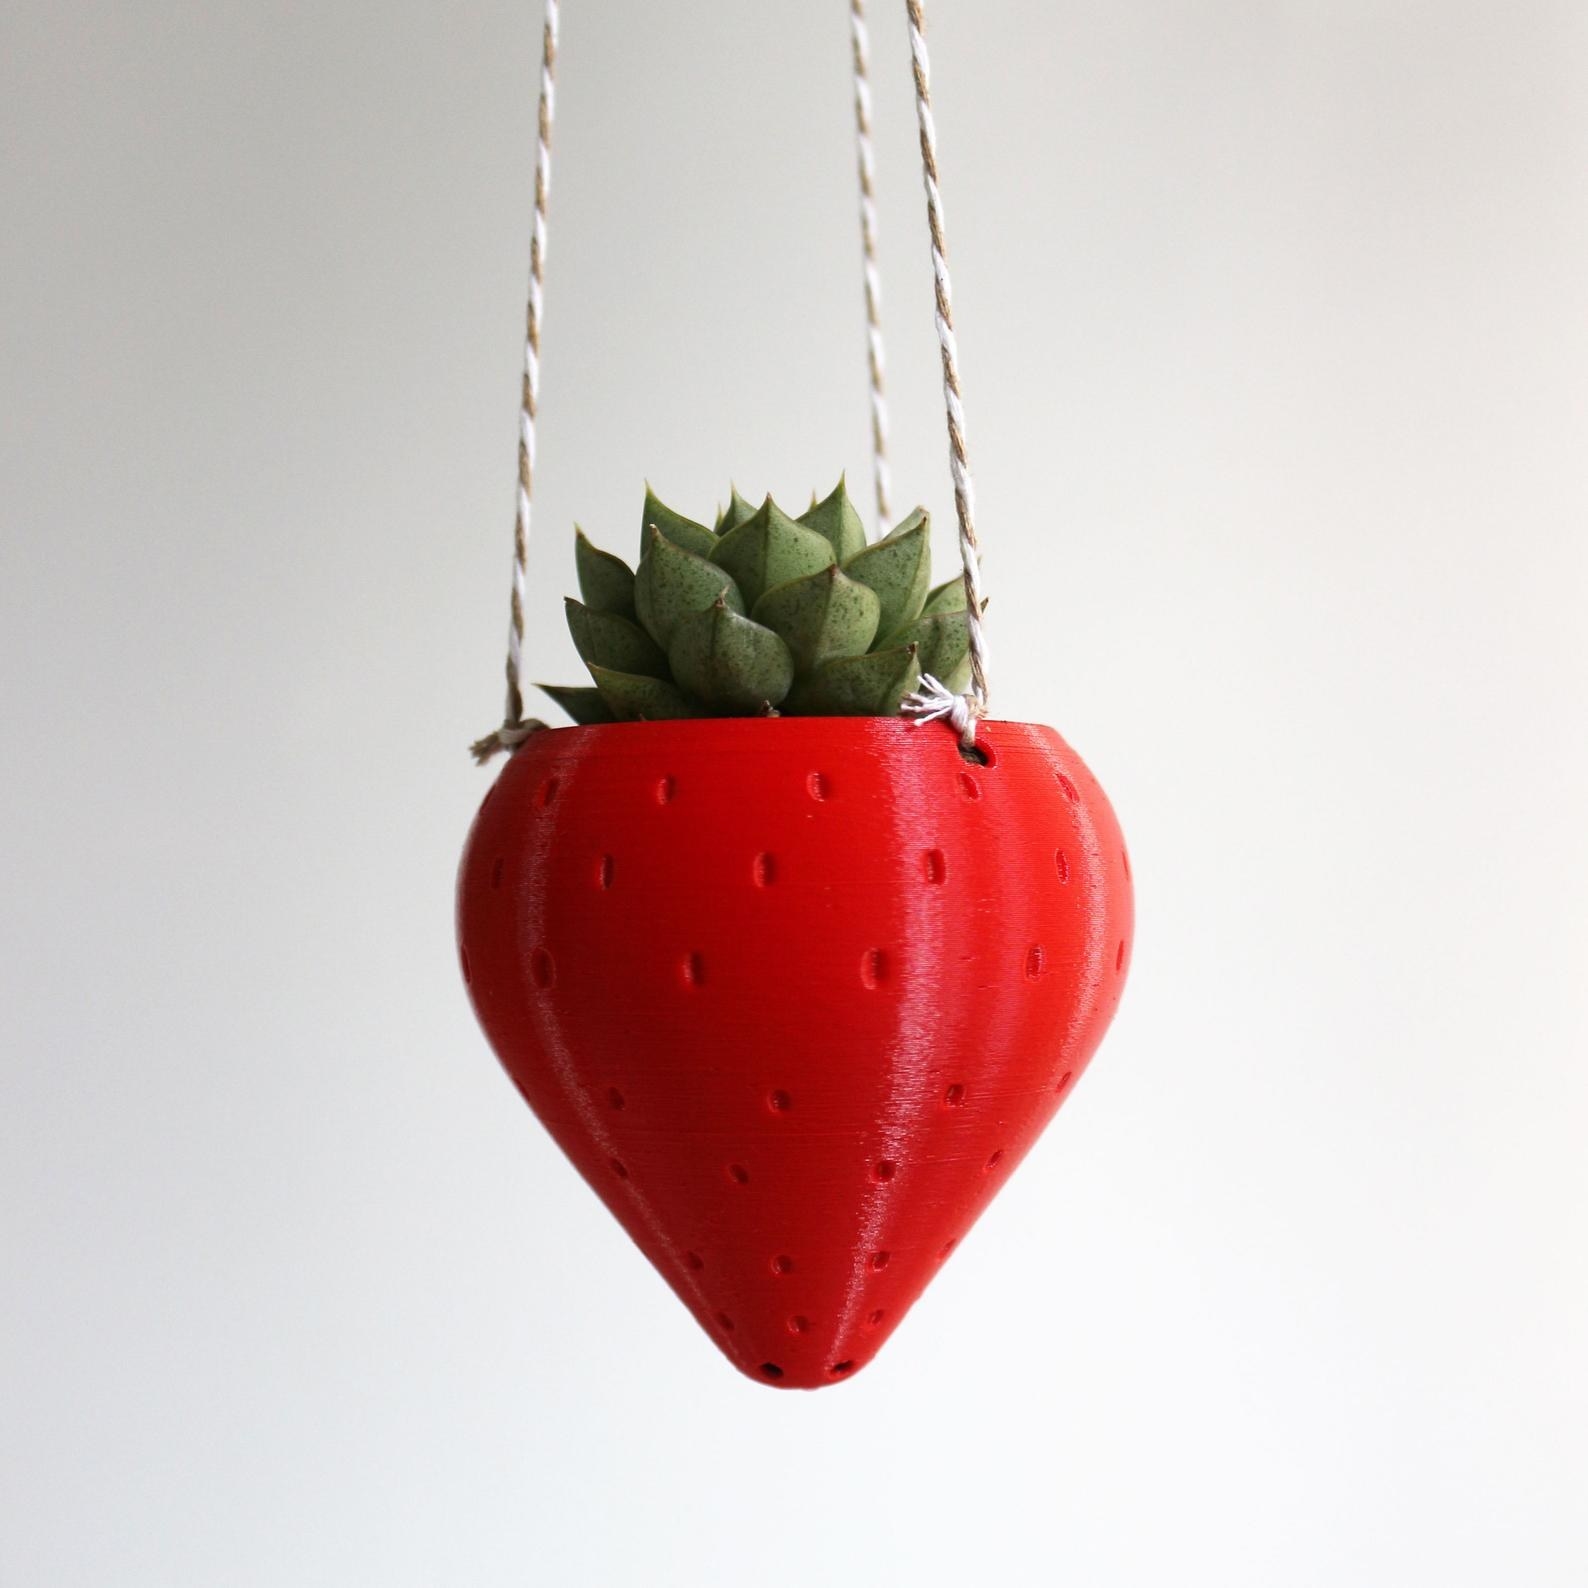 the red strawberry-shaped planter holding a succulent